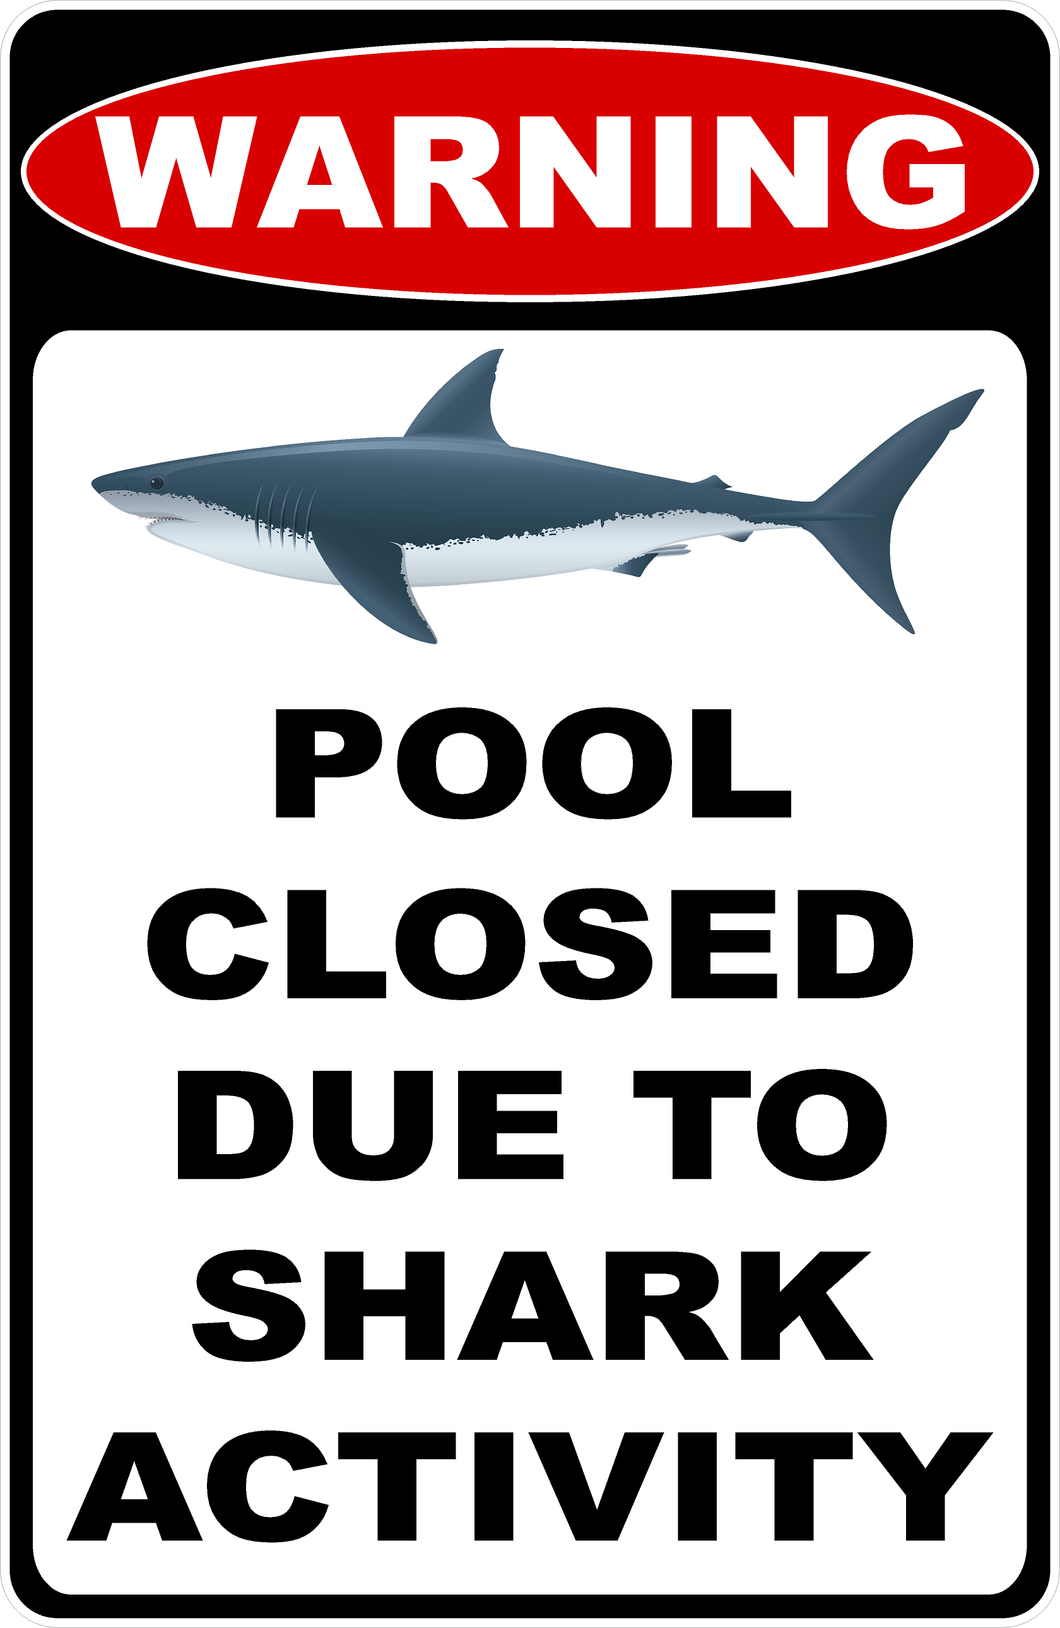 Warning Pool Closed Due to Shark Activity Sign